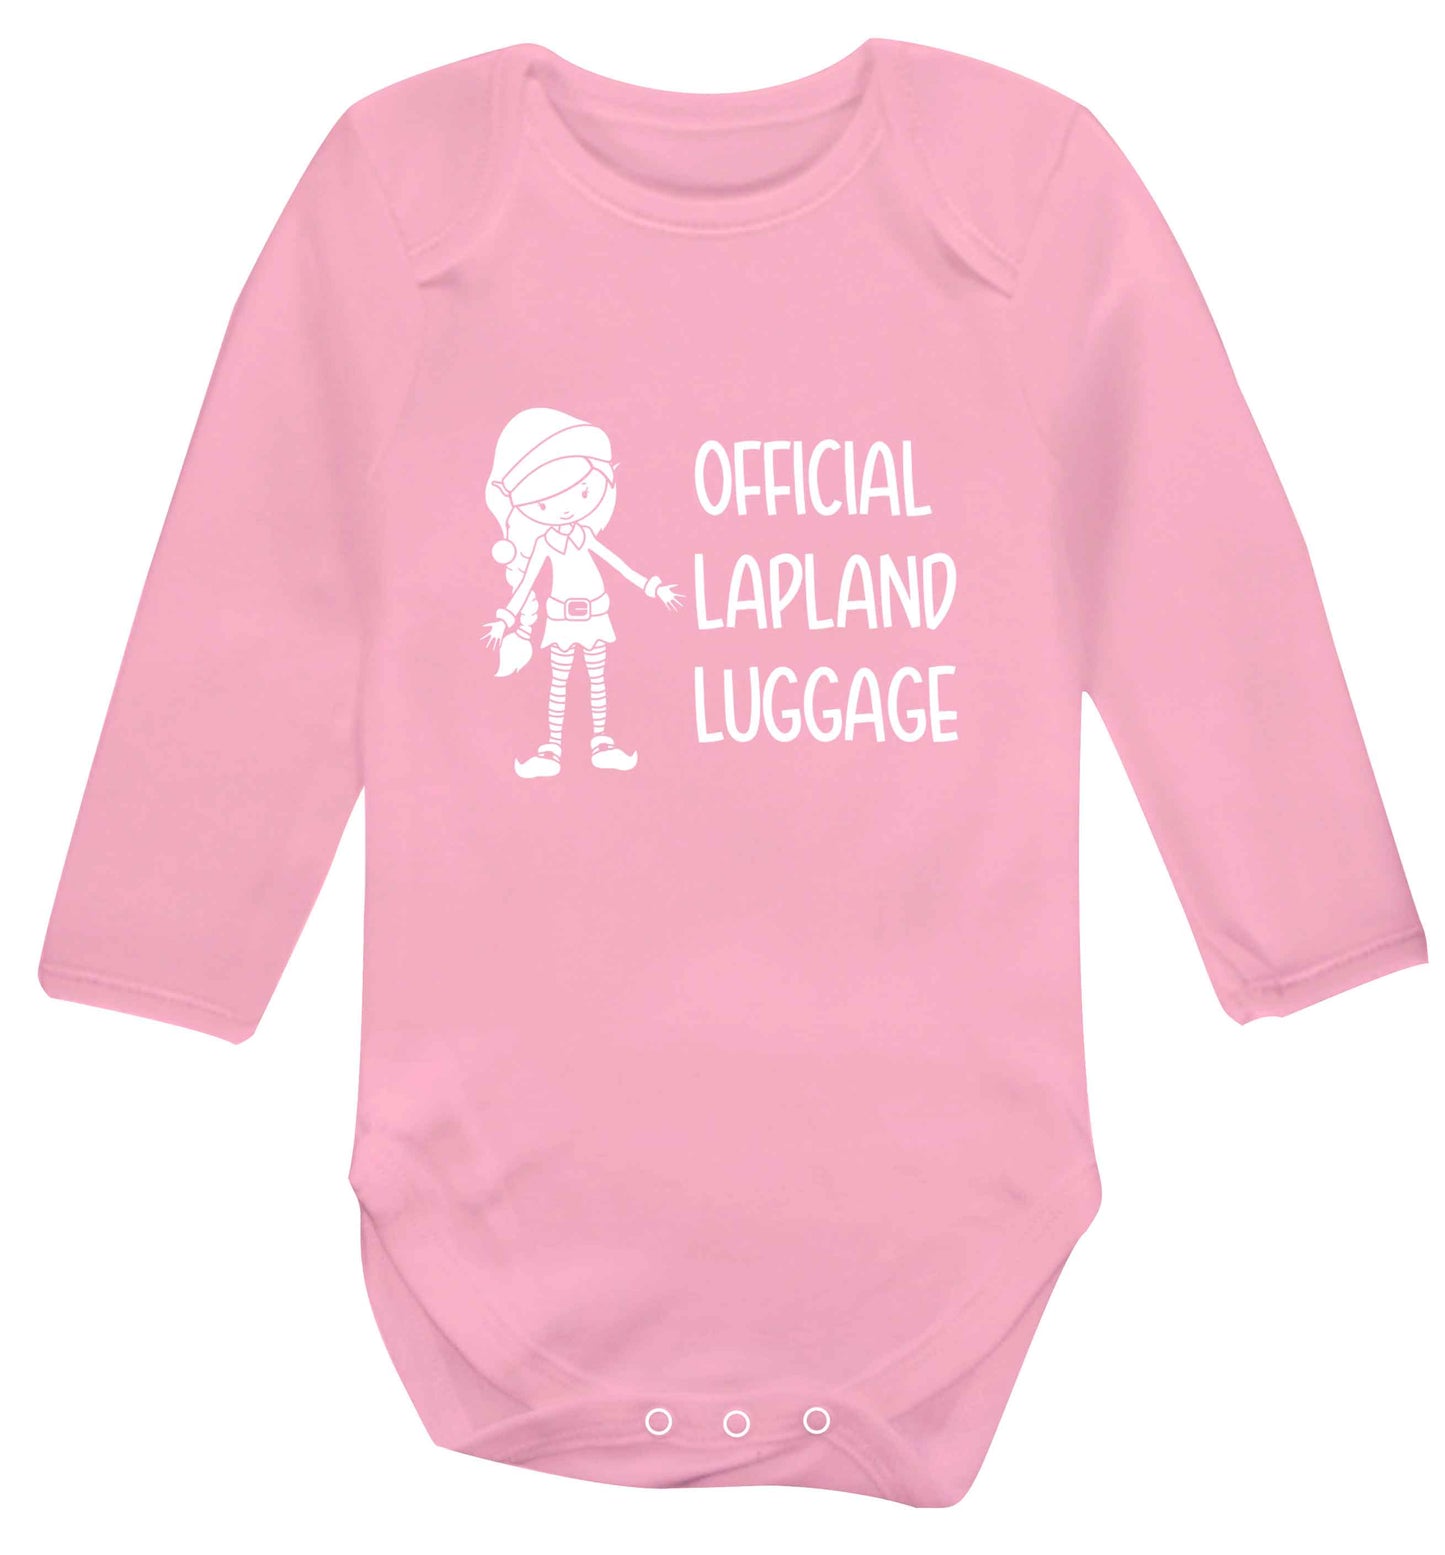 Official lapland luggage - Elf snowflake baby vest long sleeved pale pink 6-12 months